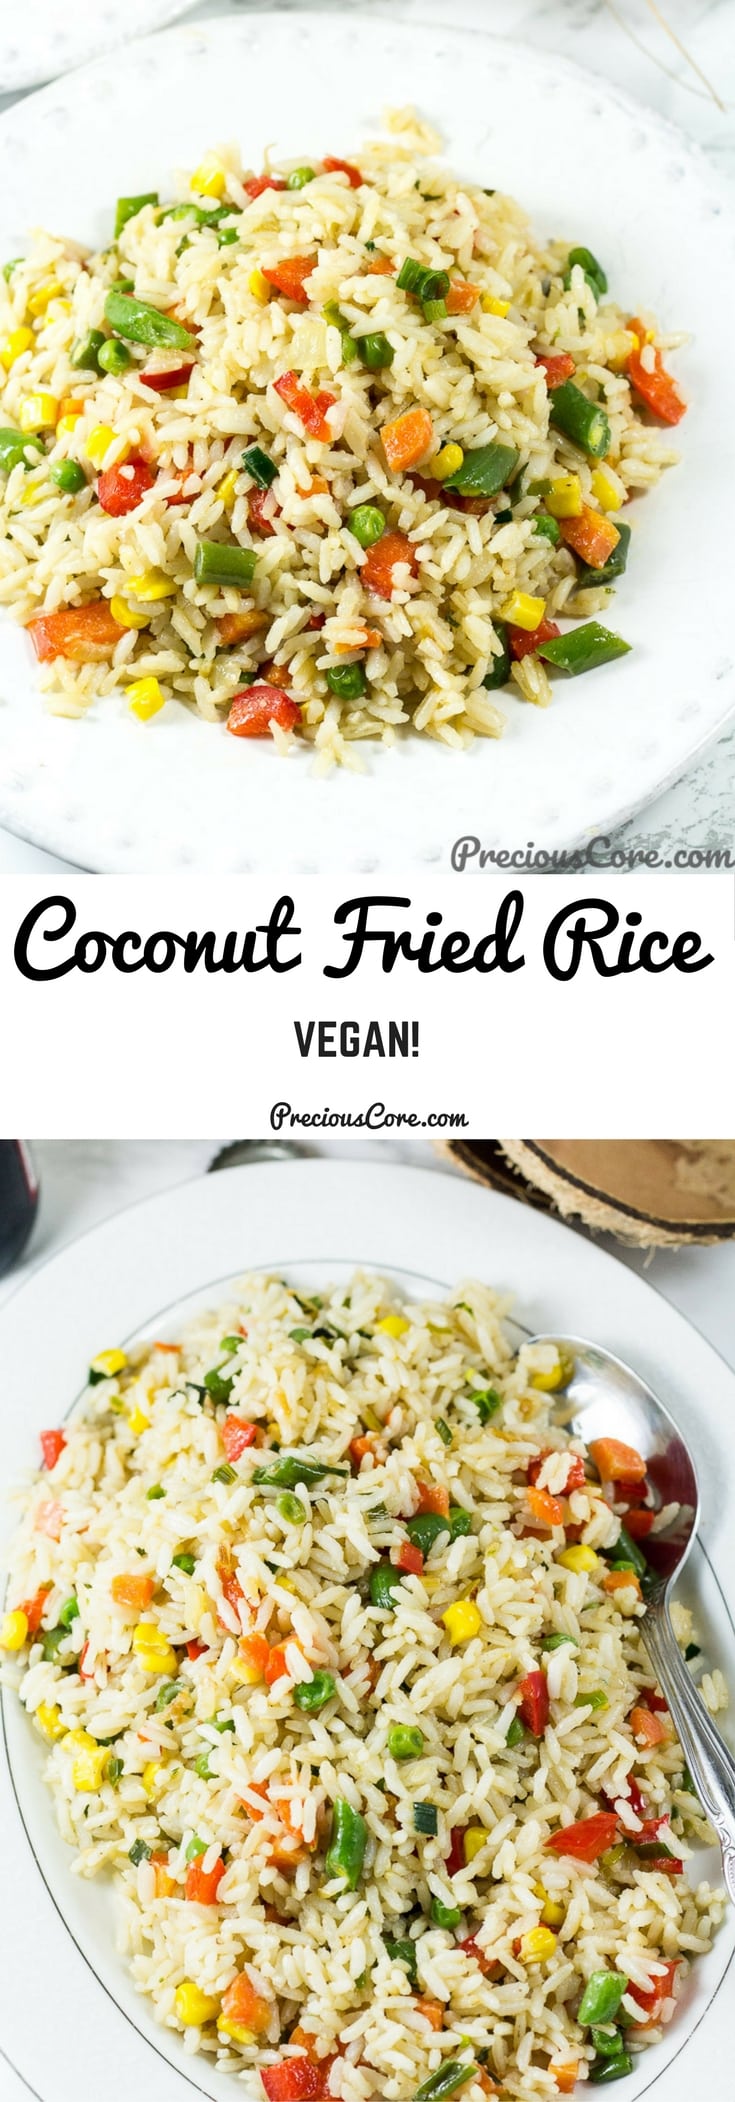 Coconut Fried Rice is pure fried rice epicness. Make this for dinner or for parties/potlucks. The rice is cooked in coconut milk then stir-fried in coconut oil. Perfectly coconutty and vegan! Get the recipe on preciouscore,com. #Coconut #DinnerRecipes #Vegan